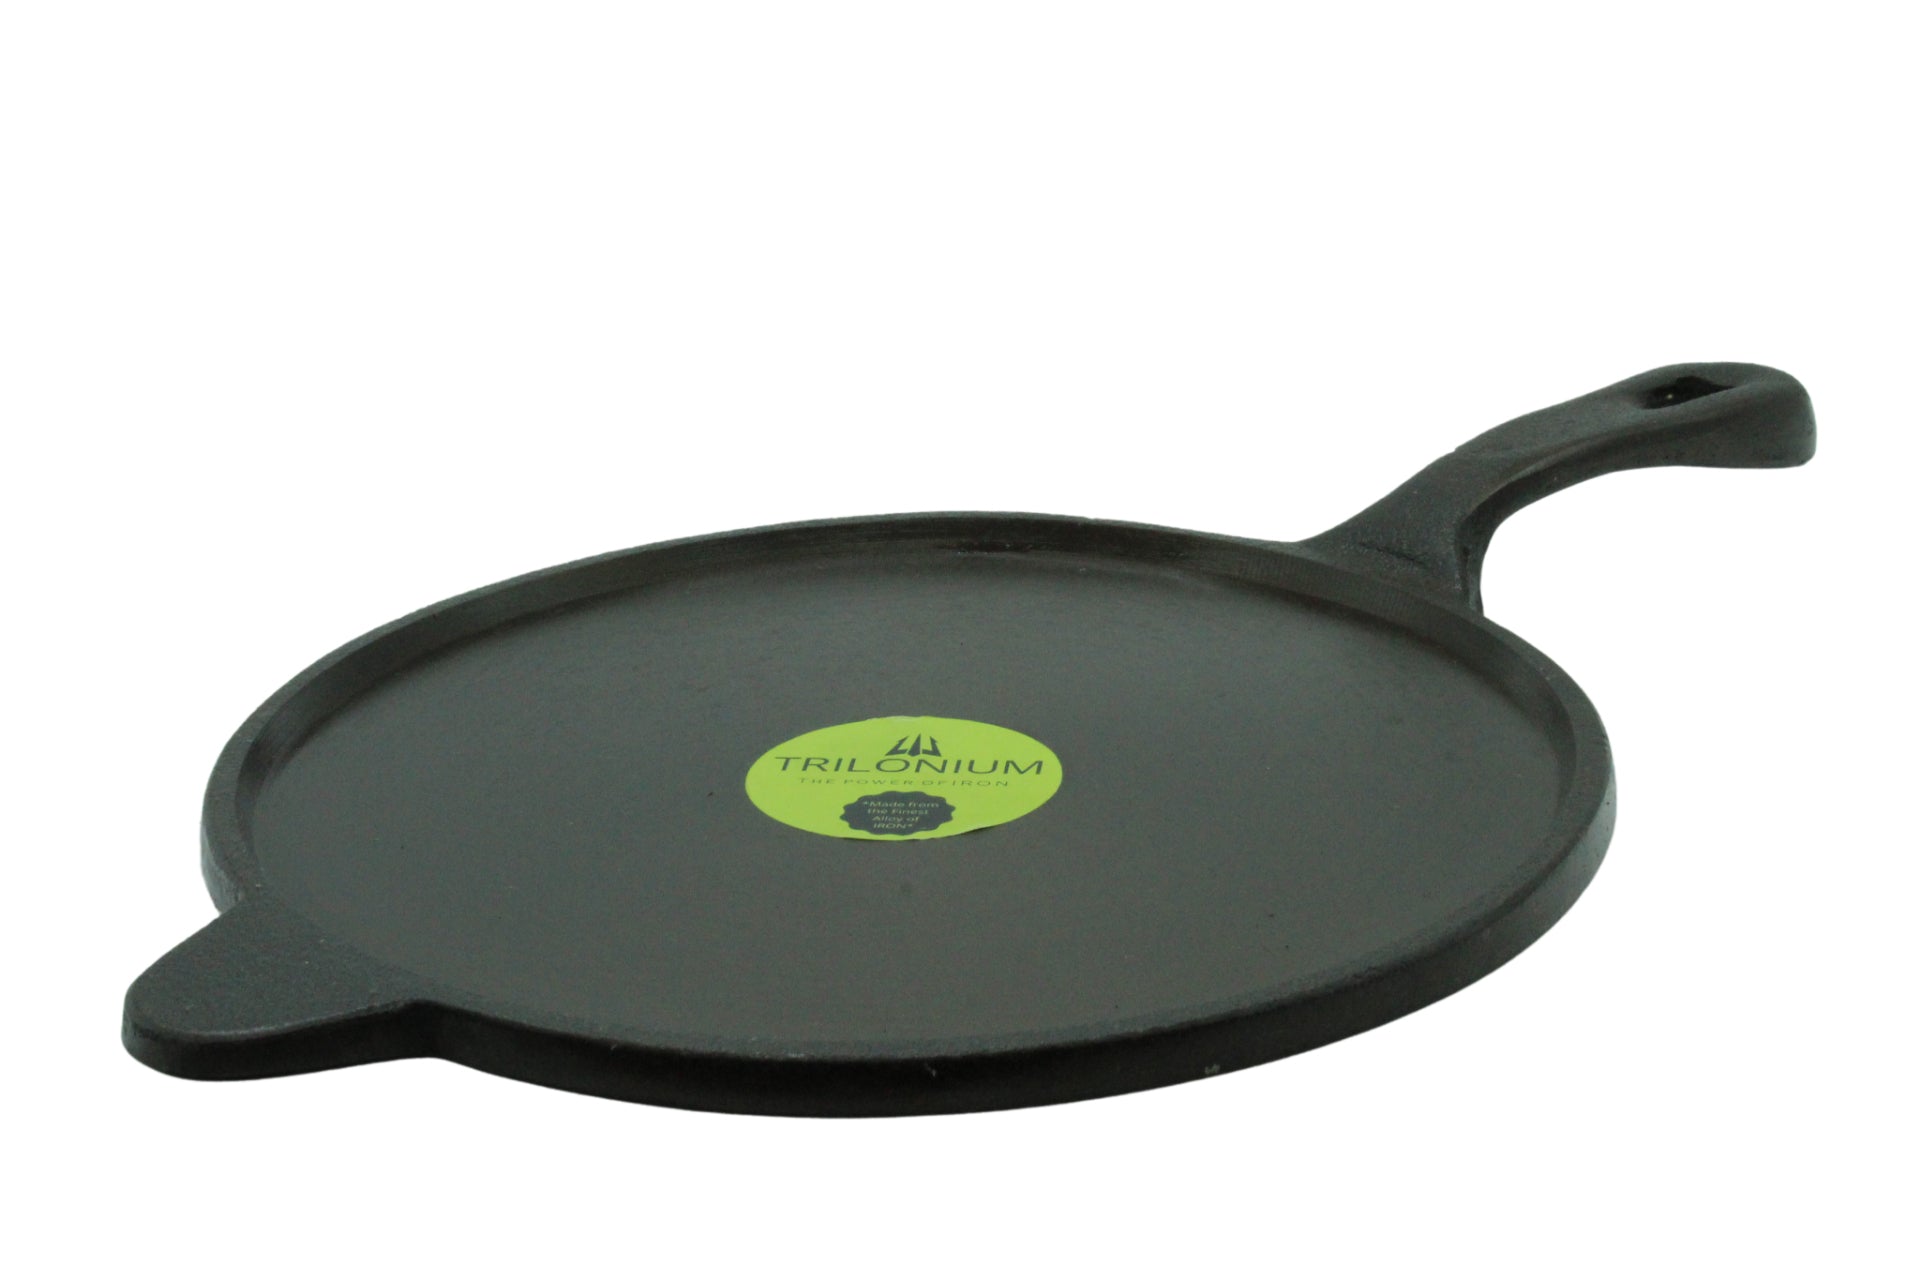 Cast Iron Dosa Tawa | Pre-Seasoned | 10.25 inches | 2.36 KG | Induction Cooktops TRILONIUM | Cast Iron Cookware